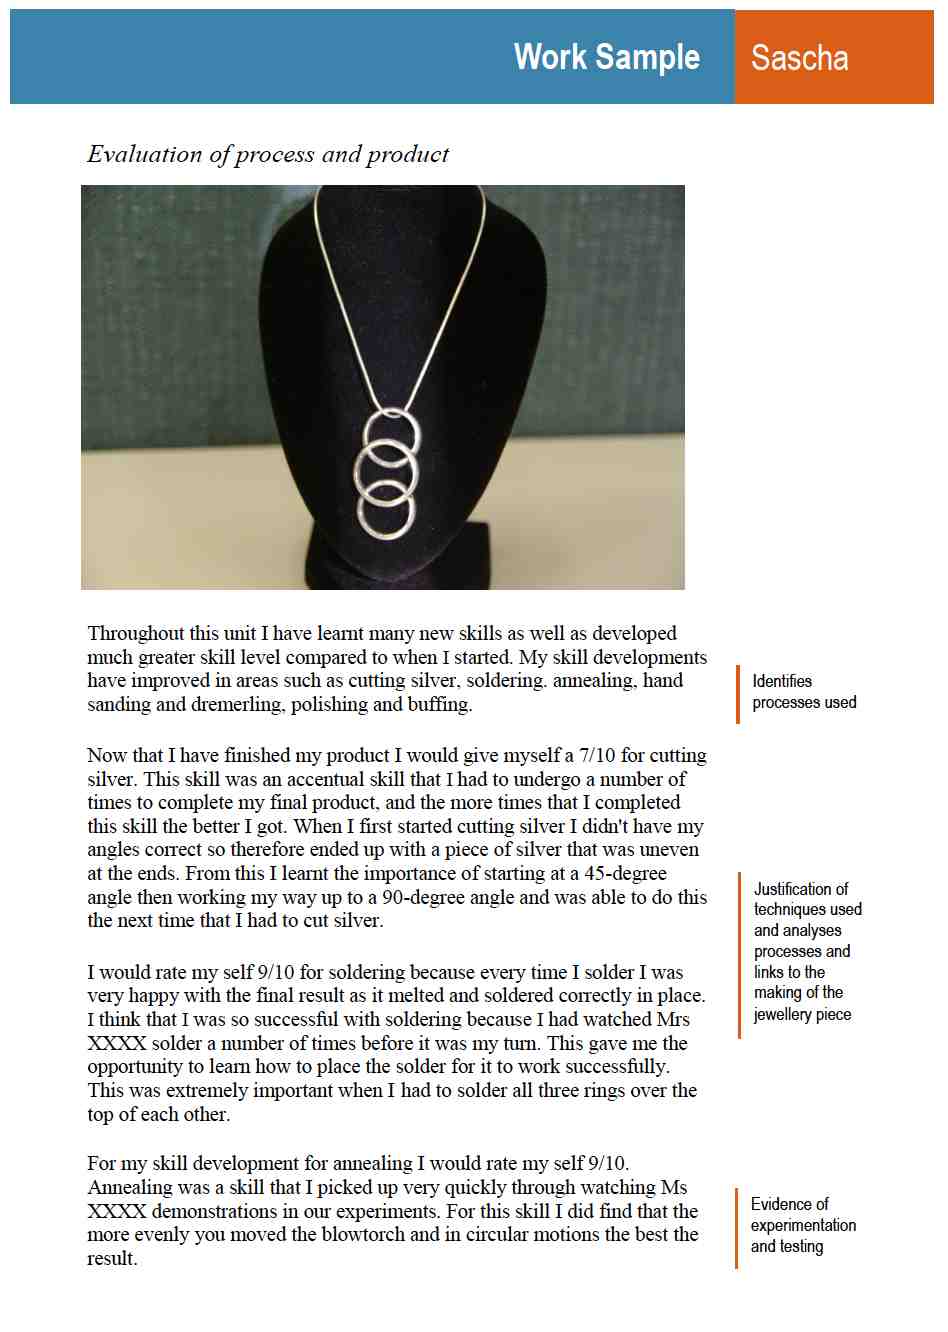 Final product and evaluation of a jewellery project - Sascha